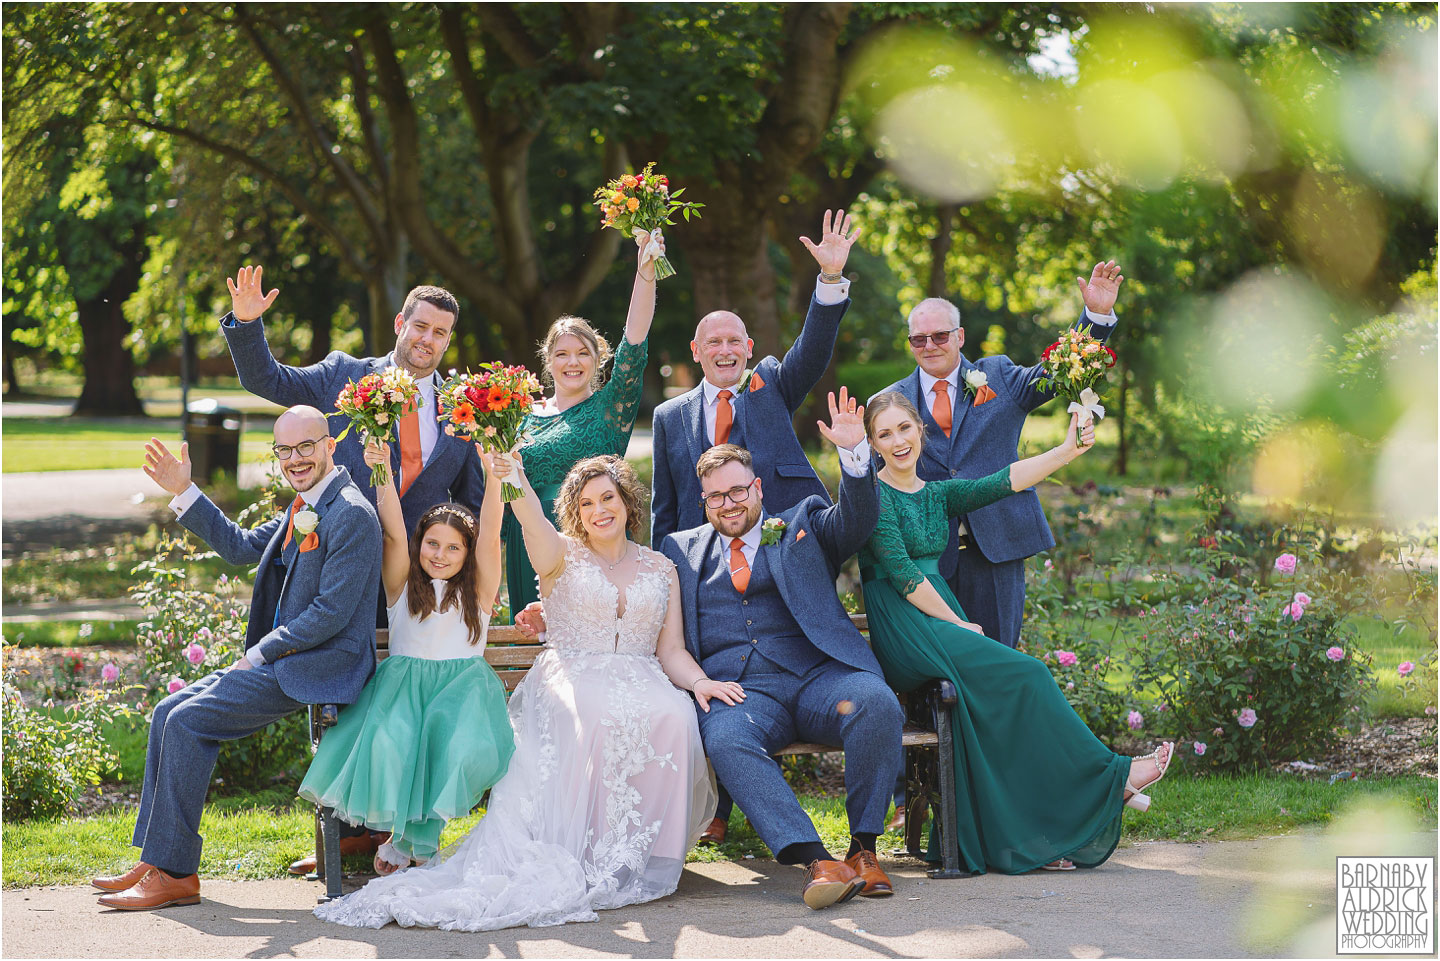 Relaxed wedding group photos at the Earl of Doncaster Hotel by Yorkshire Wedding Photographer Barnaby Aldrick